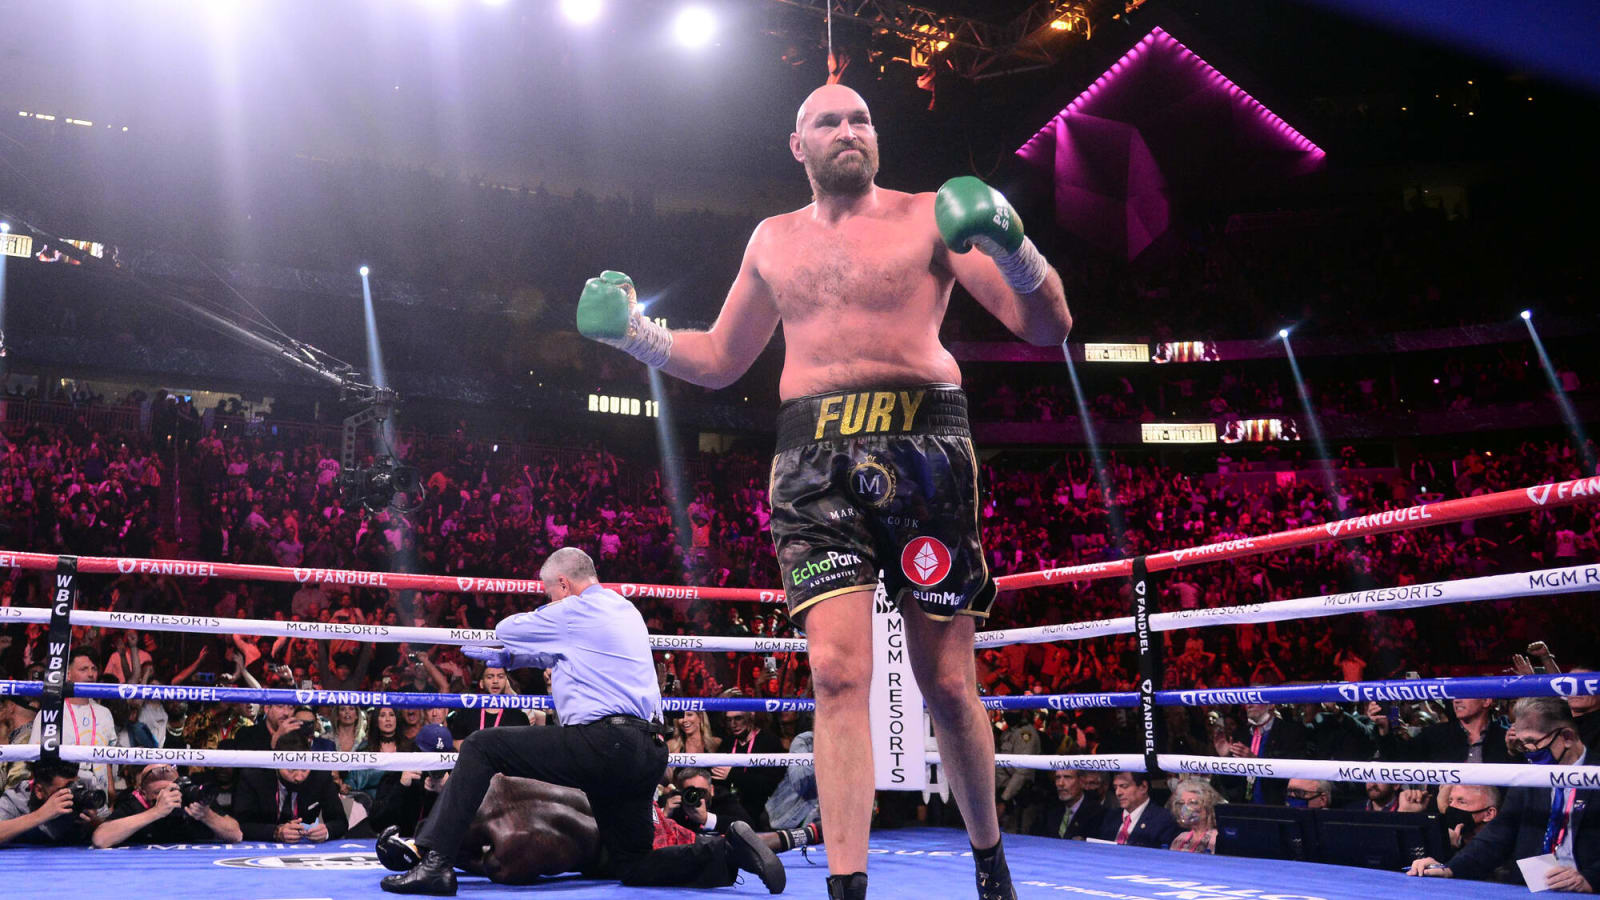 Fury vs. Usyk Rematch Being Planned For October